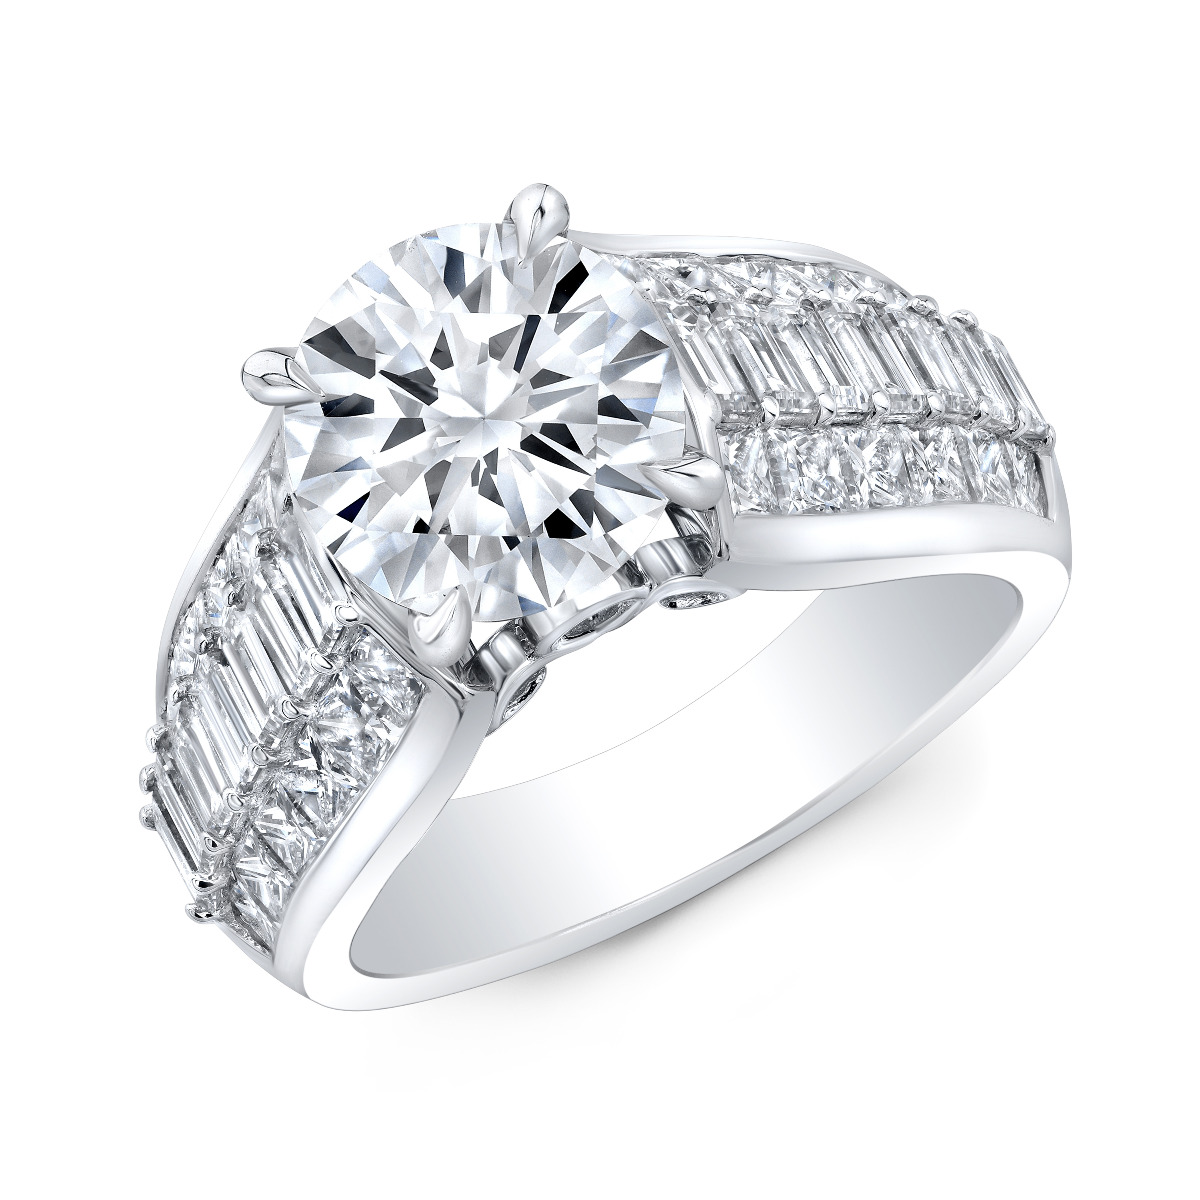 This Beautiful Baguette & Princess Pave Diamond Engagement Ring is made of 100% natural earth mined diamonds that goes halfway around.